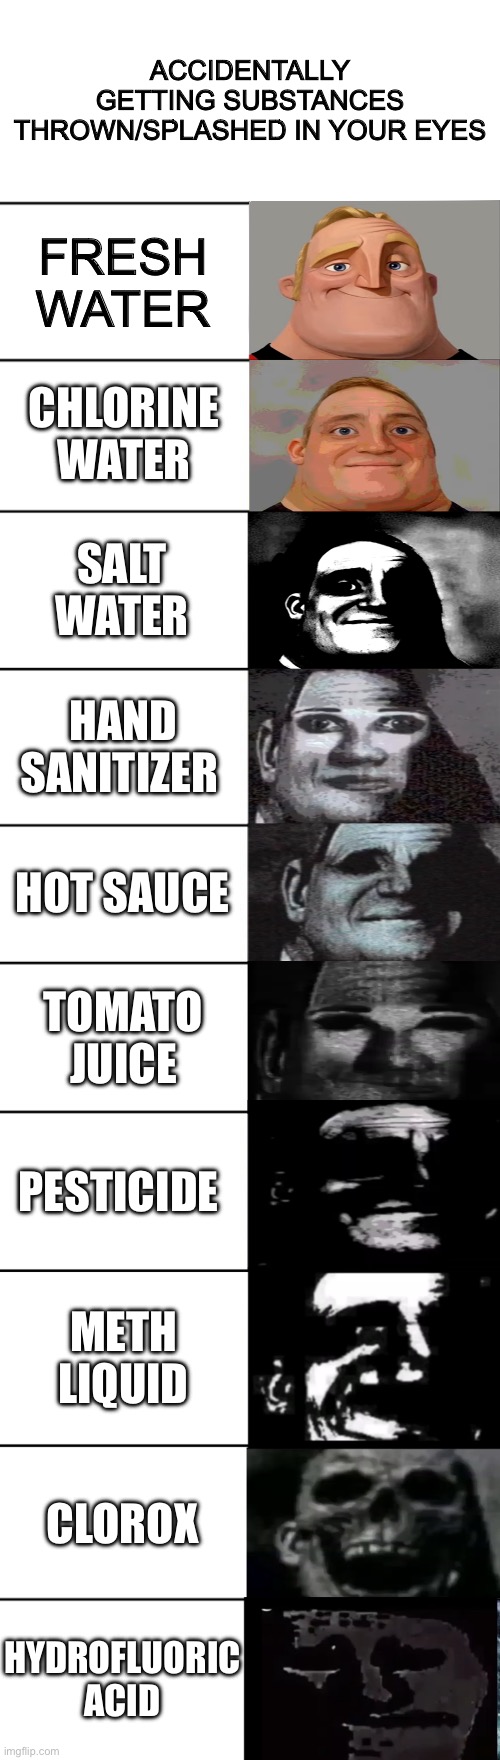 I hate it | ACCIDENTALLY GETTING SUBSTANCES THROWN/SPLASHED IN YOUR EYES; FRESH WATER; CHLORINE WATER; SALT WATER; HAND SANITIZER; HOT SAUCE; TOMATO JUICE; PESTICIDE; METH LIQUID; CLOROX; HYDROFLUORIC ACID | image tagged in mr incredible becoming uncanny | made w/ Imgflip meme maker